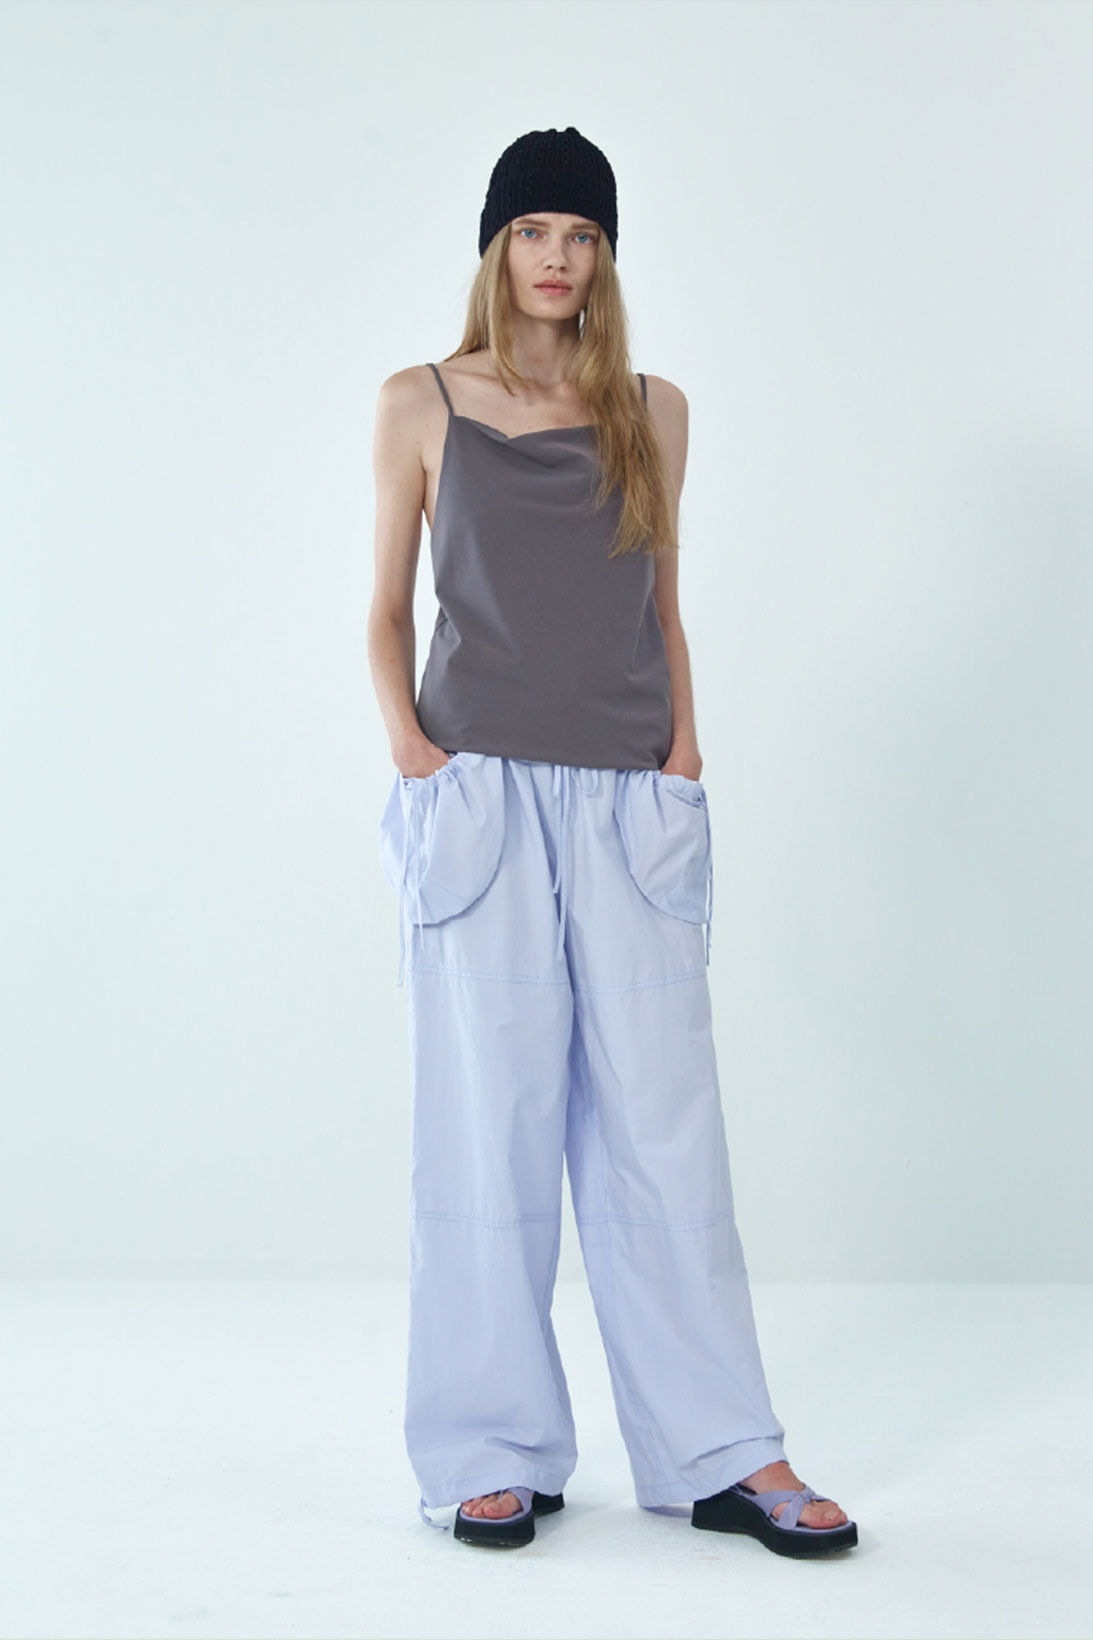 theopen product spring summer 2021 ss21 collection lookbook tank top trousers